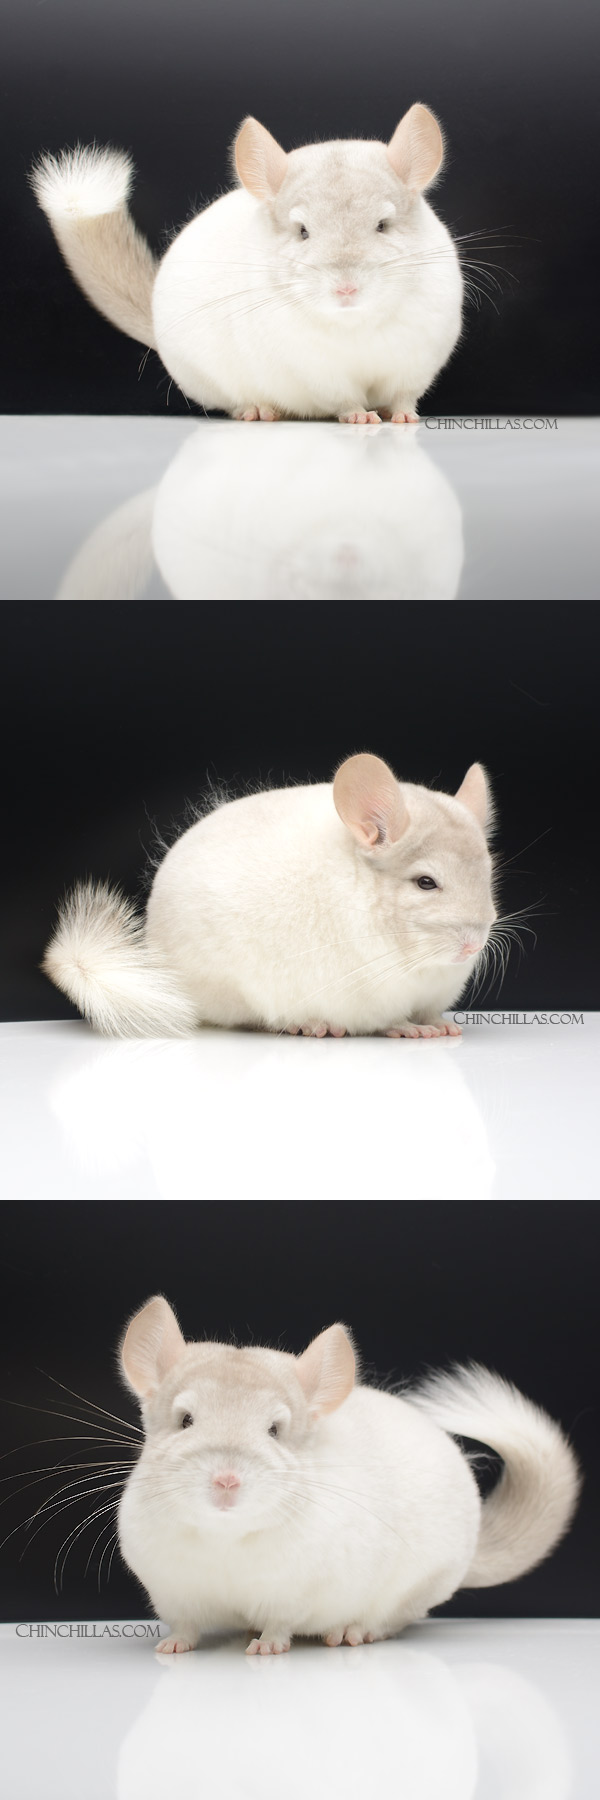 Chinchilla or related item offered for sale or export on Chinchillas.com - 22128 Large Blocky Show Quality Pink White Male Chinchilla